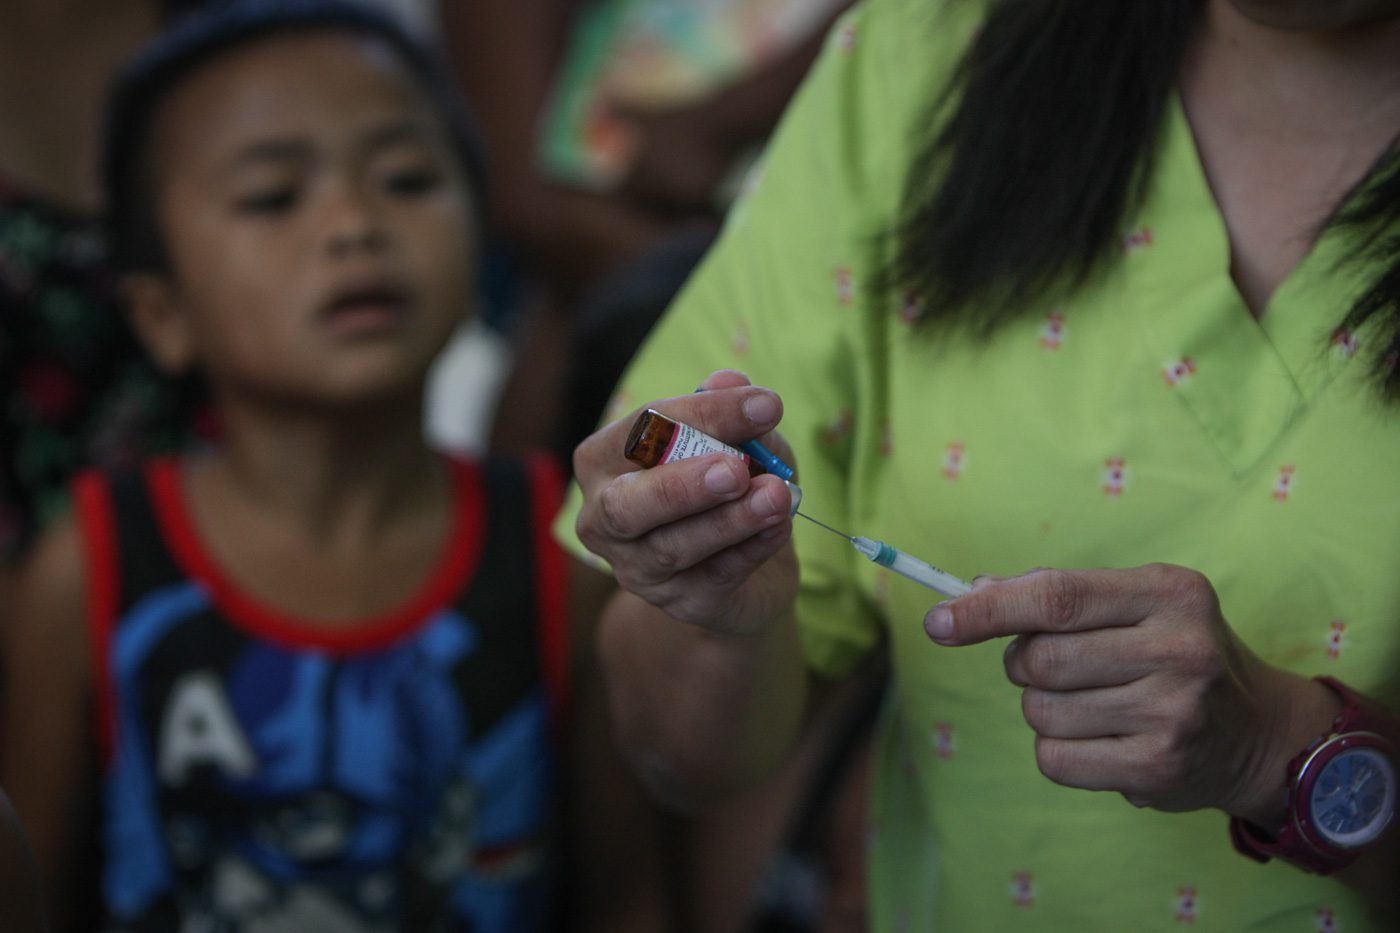 DOH Calabarzon creates task force to address increase in measles cases